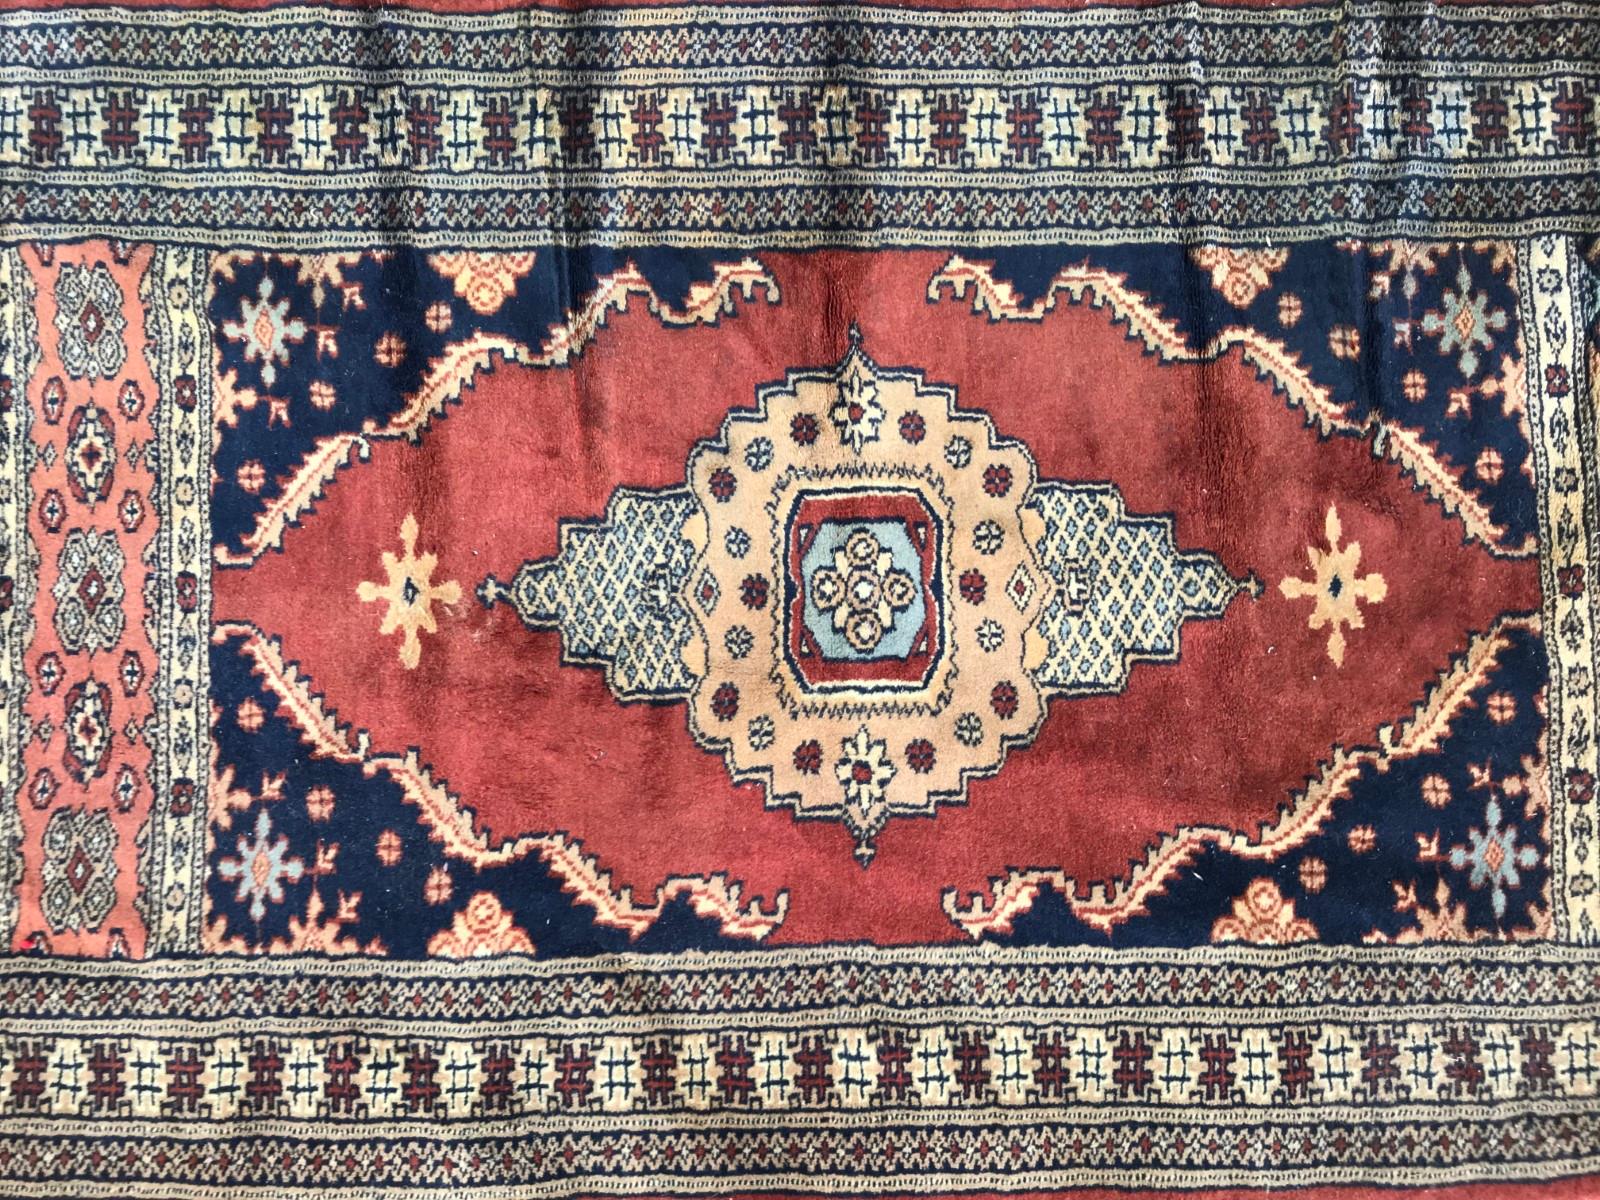 Late 20th century Pakistan corridor rug with a geometrical design and beautiful colors with blue, brown, pink and purple, entirely hand knotted with wool velvet on cotton foundation.